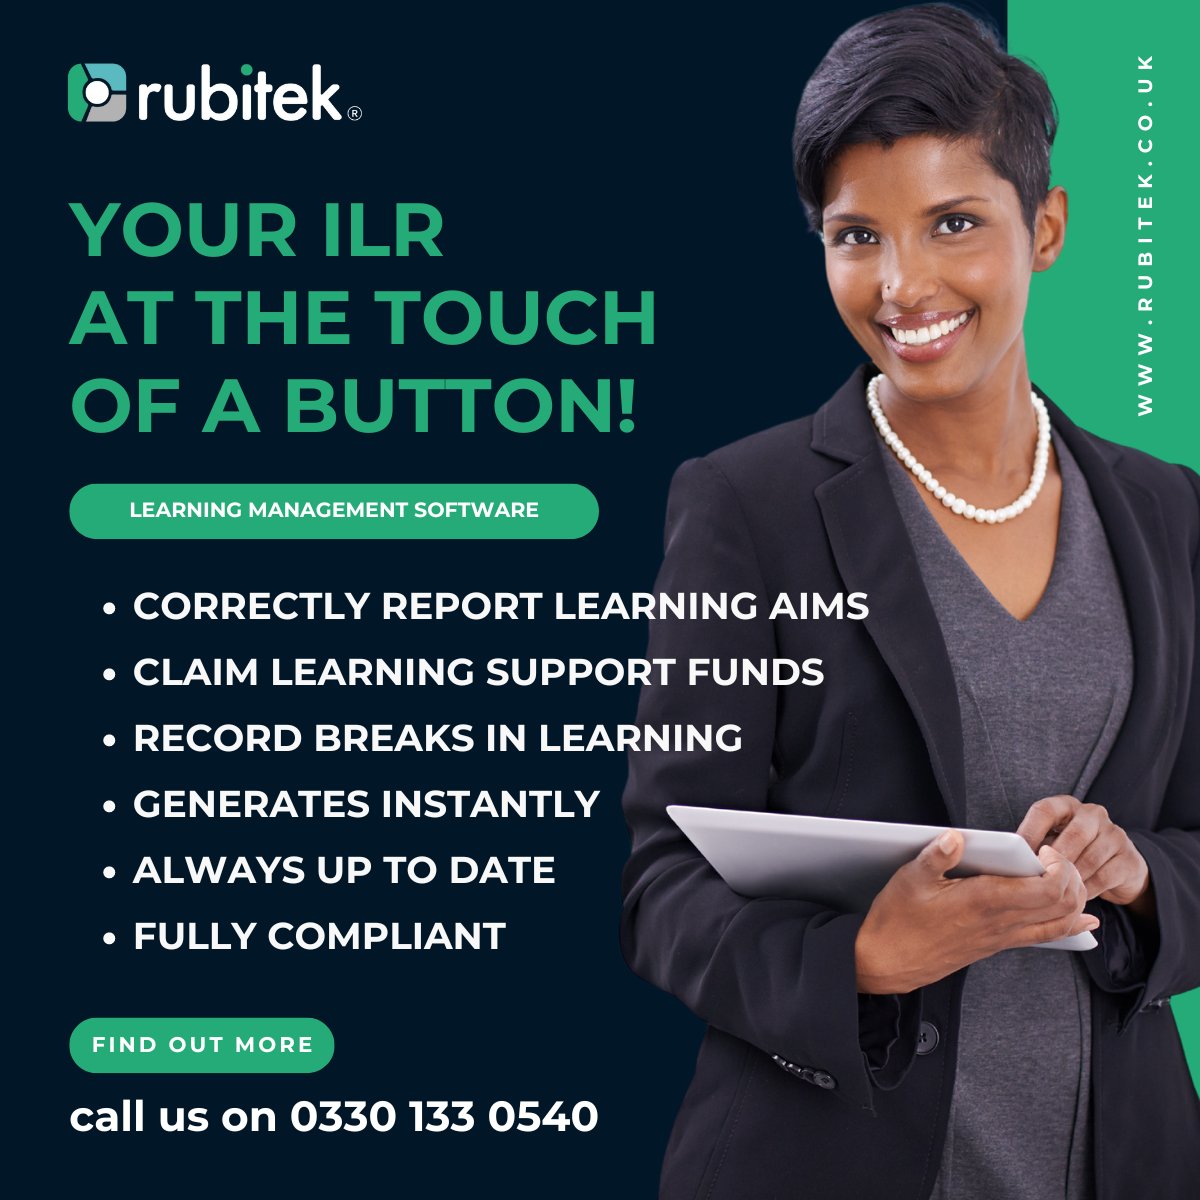 With Rubitek, generating your ILR is hassle free.  Say goodbye to days of data entry and scrutiny, and hello to a fully compliant ILR at the touch of a button!
wix.to/ca2QY14

#apprenticeships #fundingcompliance #learningmanagement #lms #efficiency #edtech